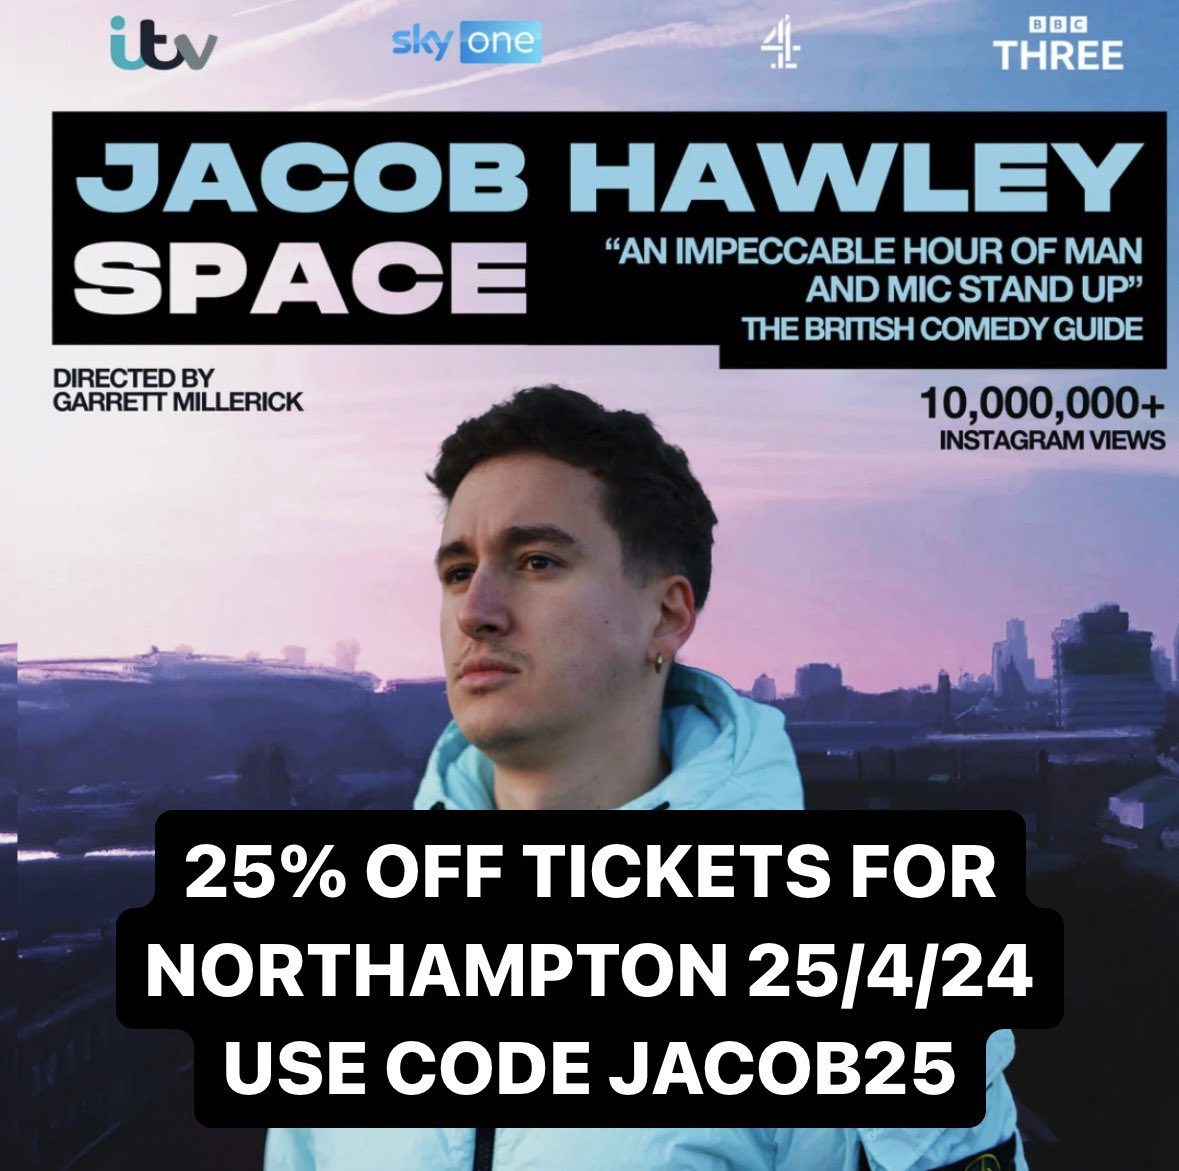 NORTHAMPTON! My tour resumes Thursday and I’m giving you a discount, use code JACOB25 to get a bit off your tickets for my show at @thecomedycrate ticket link in BIO